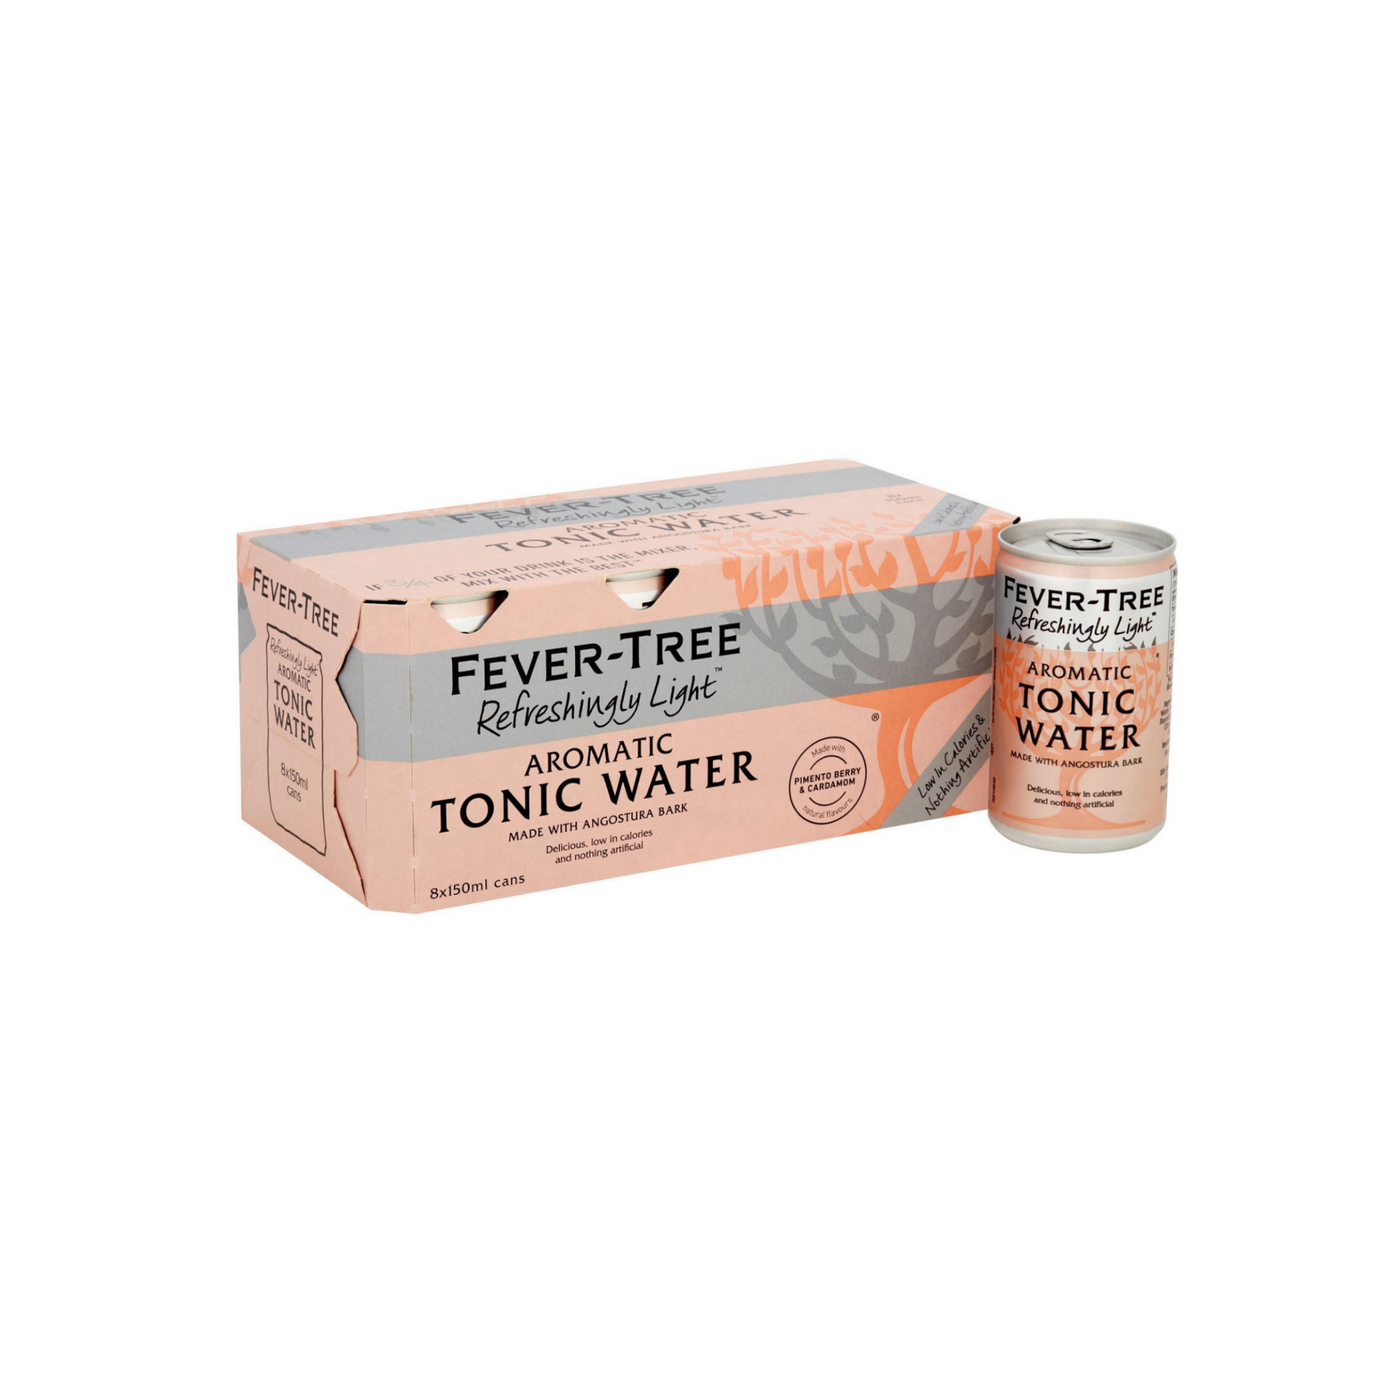 Fever-Tree Refreshingly Light Aromatic Tonic Water Cans 8 pack